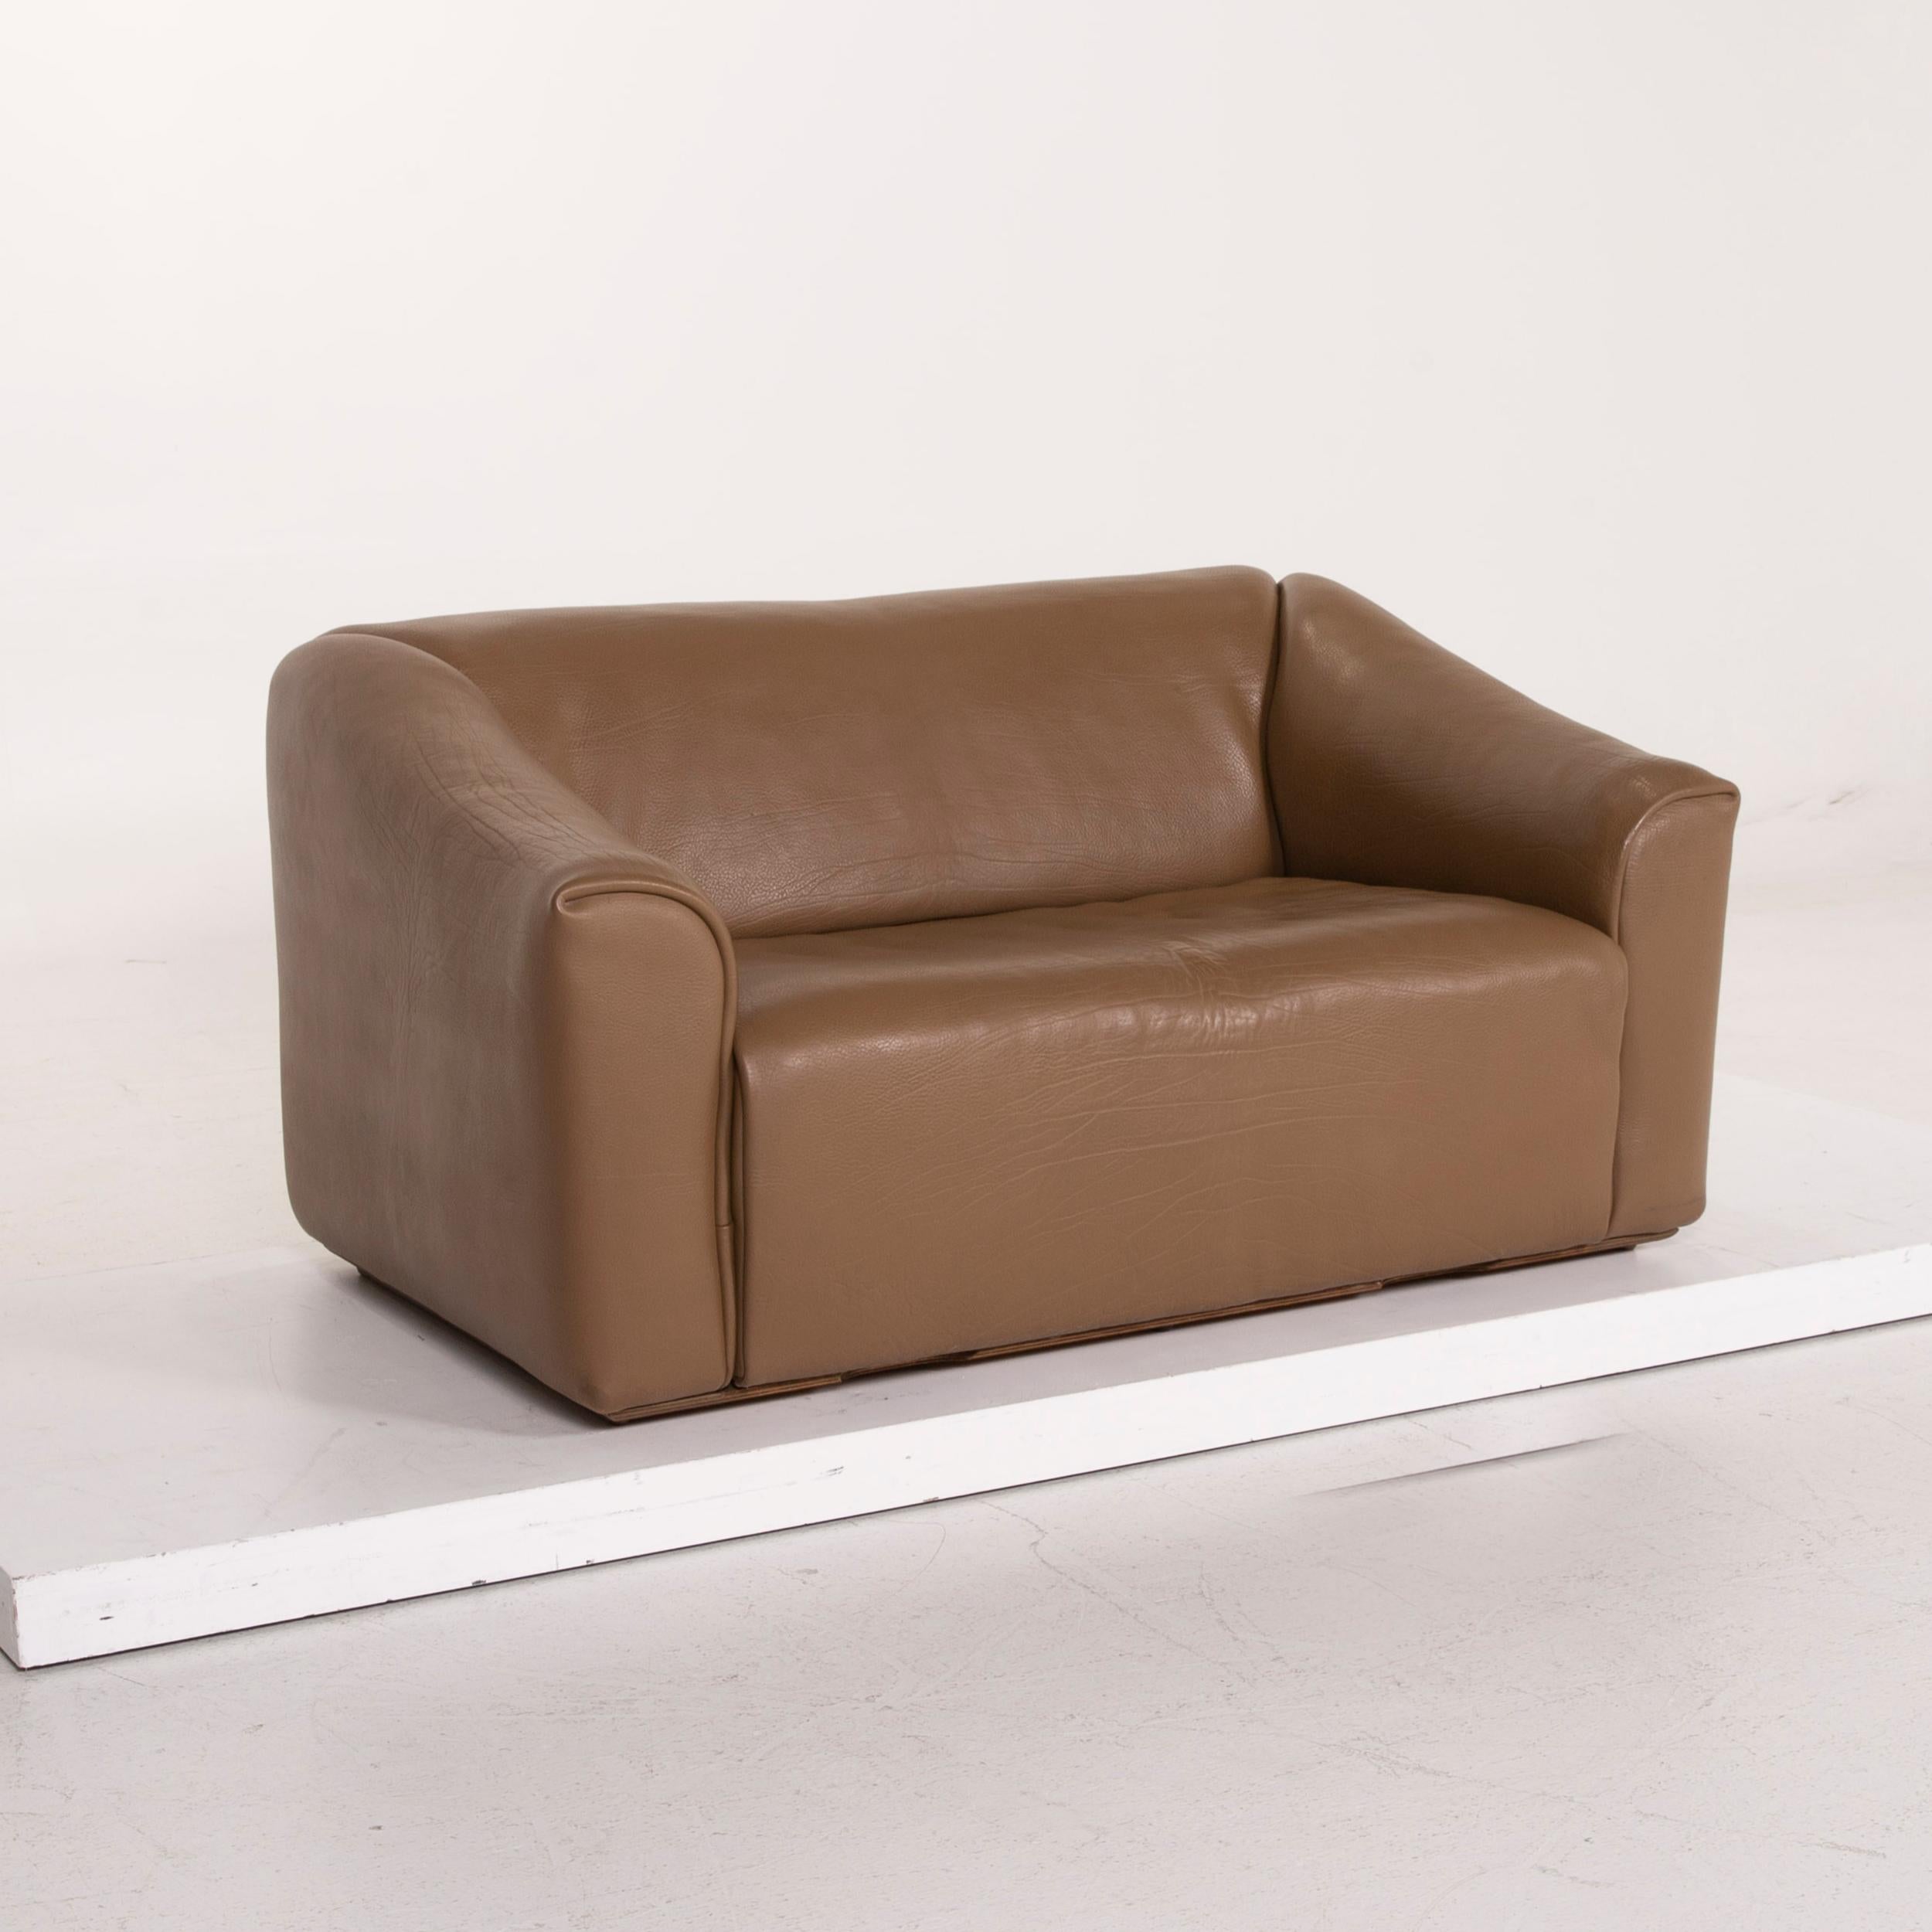 Contemporary De Sede Ds 47 Leather Sofa Brown Two-Seat Function For Sale